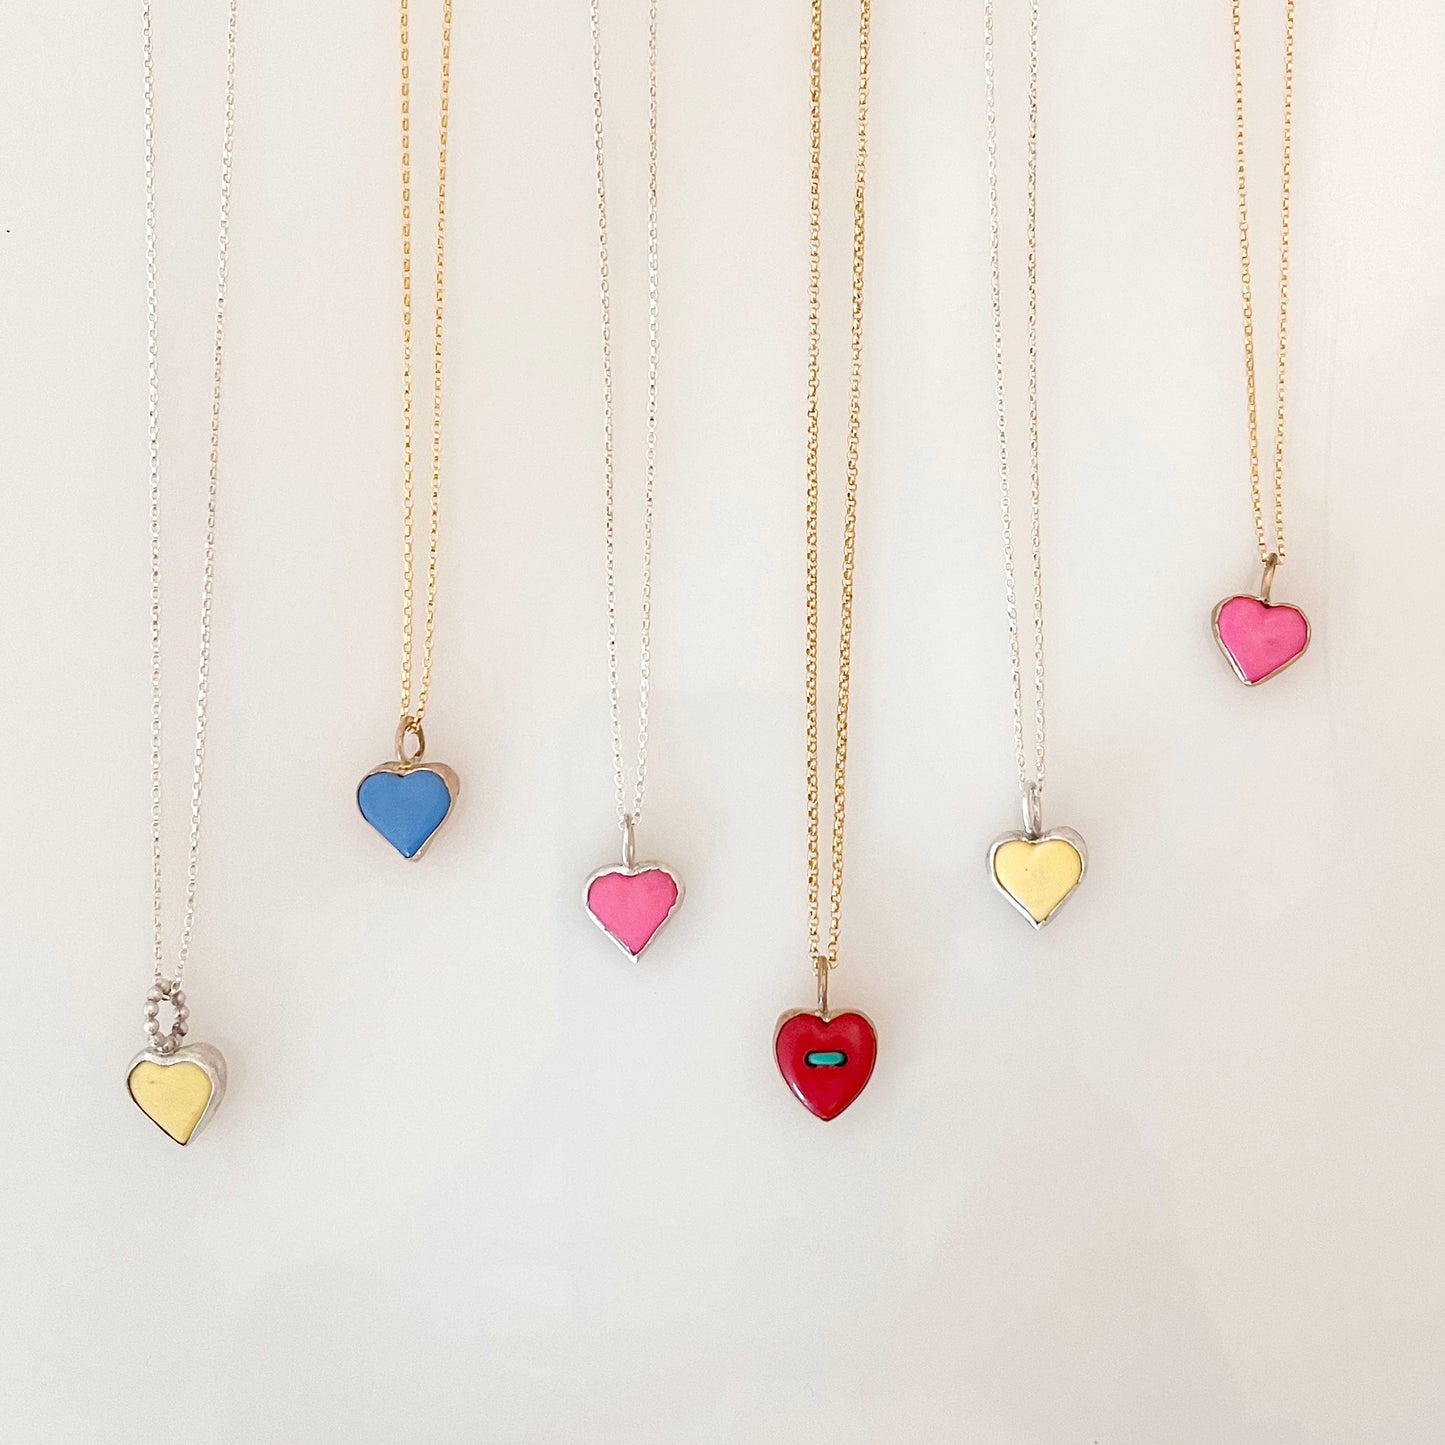 Upcycled Blue Vintage Candy Heart Necklace